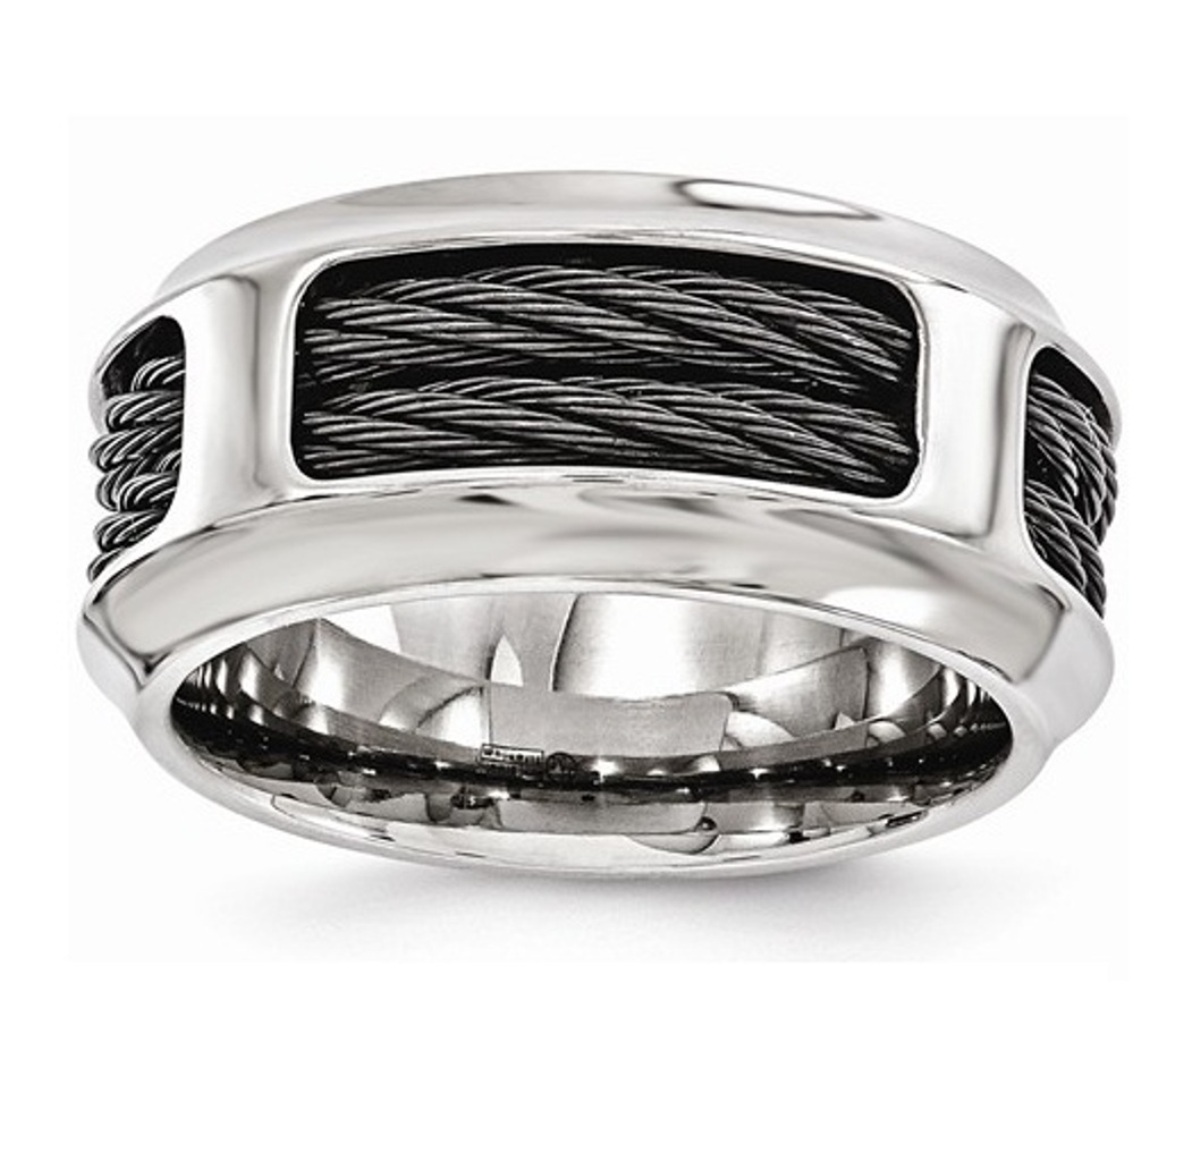  Stainless Steel And Black Ti Cable 10.75mm Band